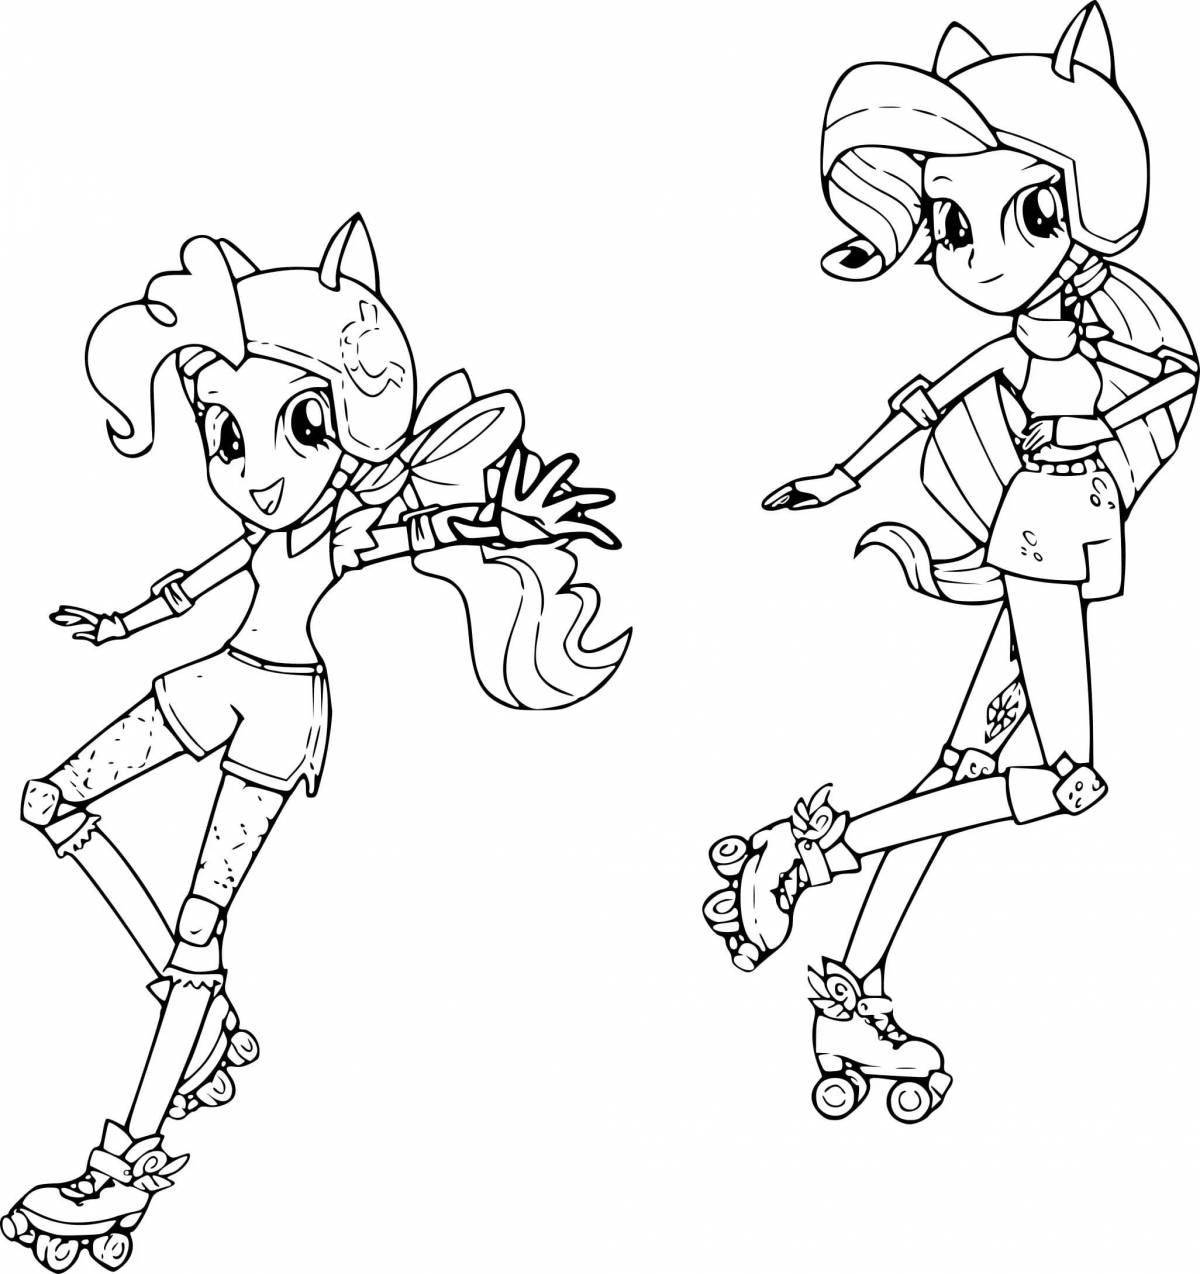 Coloring page bizarre pony people